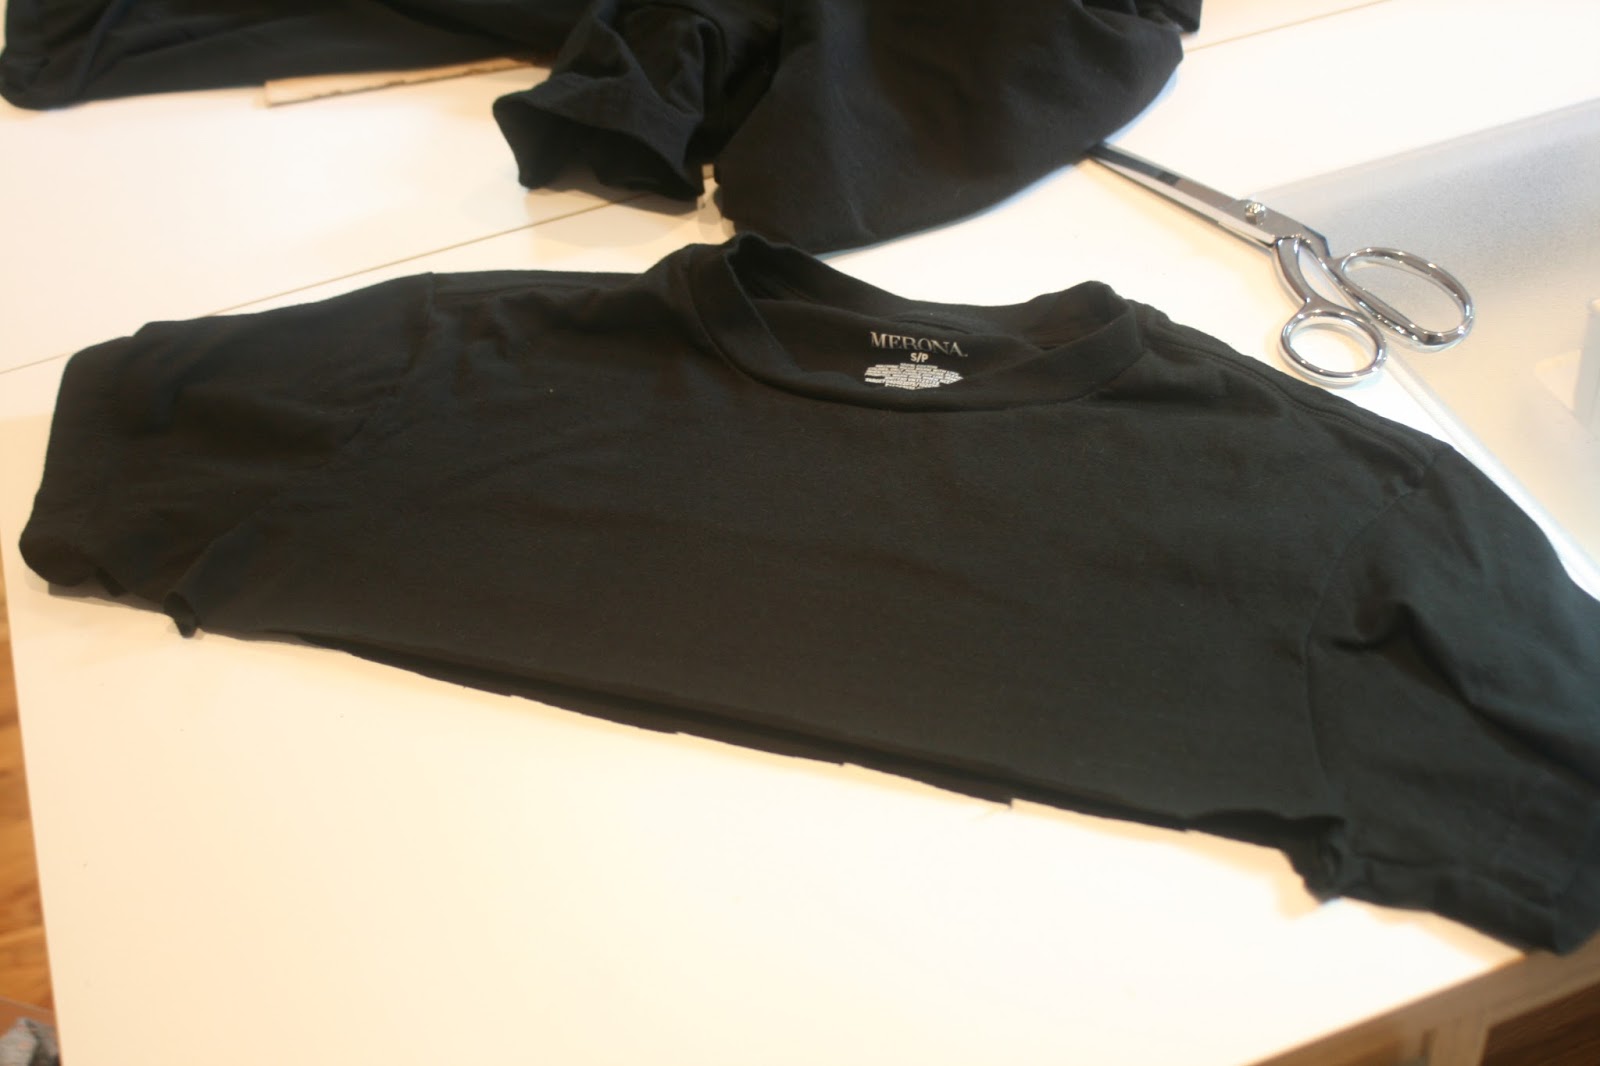 Cotton Creek Sewing: How To Make a Dress from A Pack of Men's T-Shirts